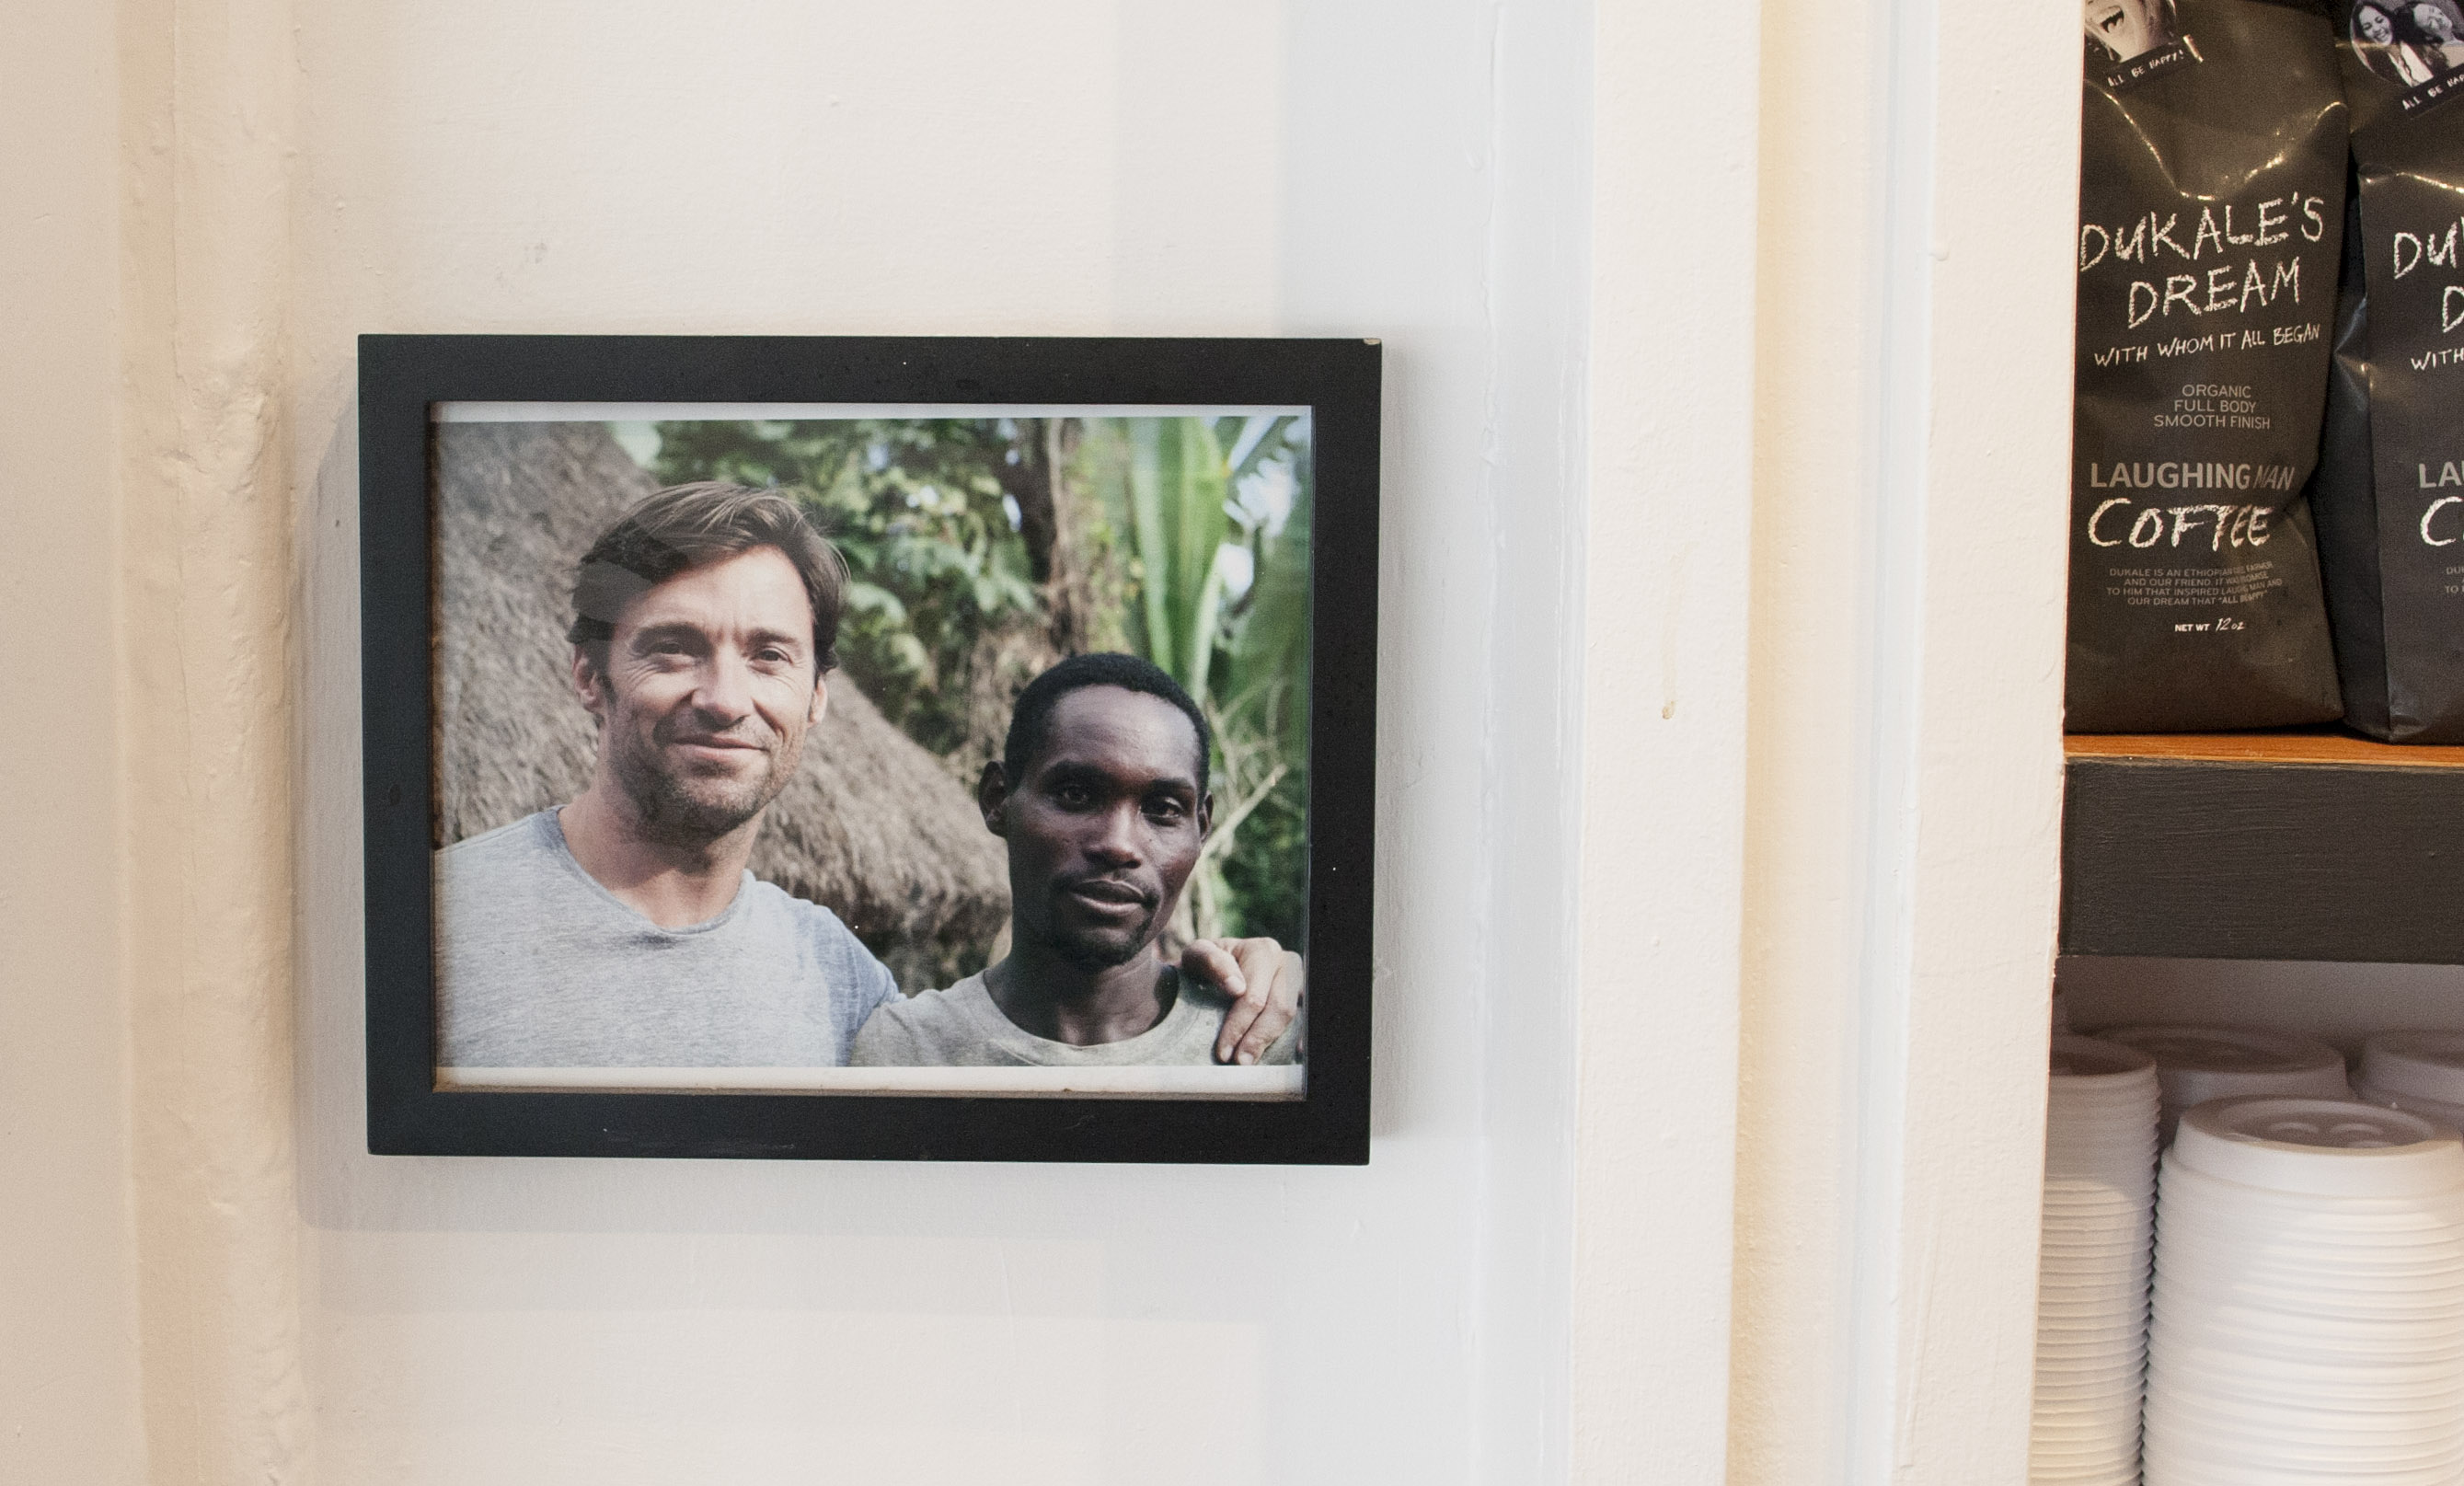 Framed photo of Dukale, a coffee farmer in Ethiopia, and actor Hugh Jackman on the Laughing Man wall